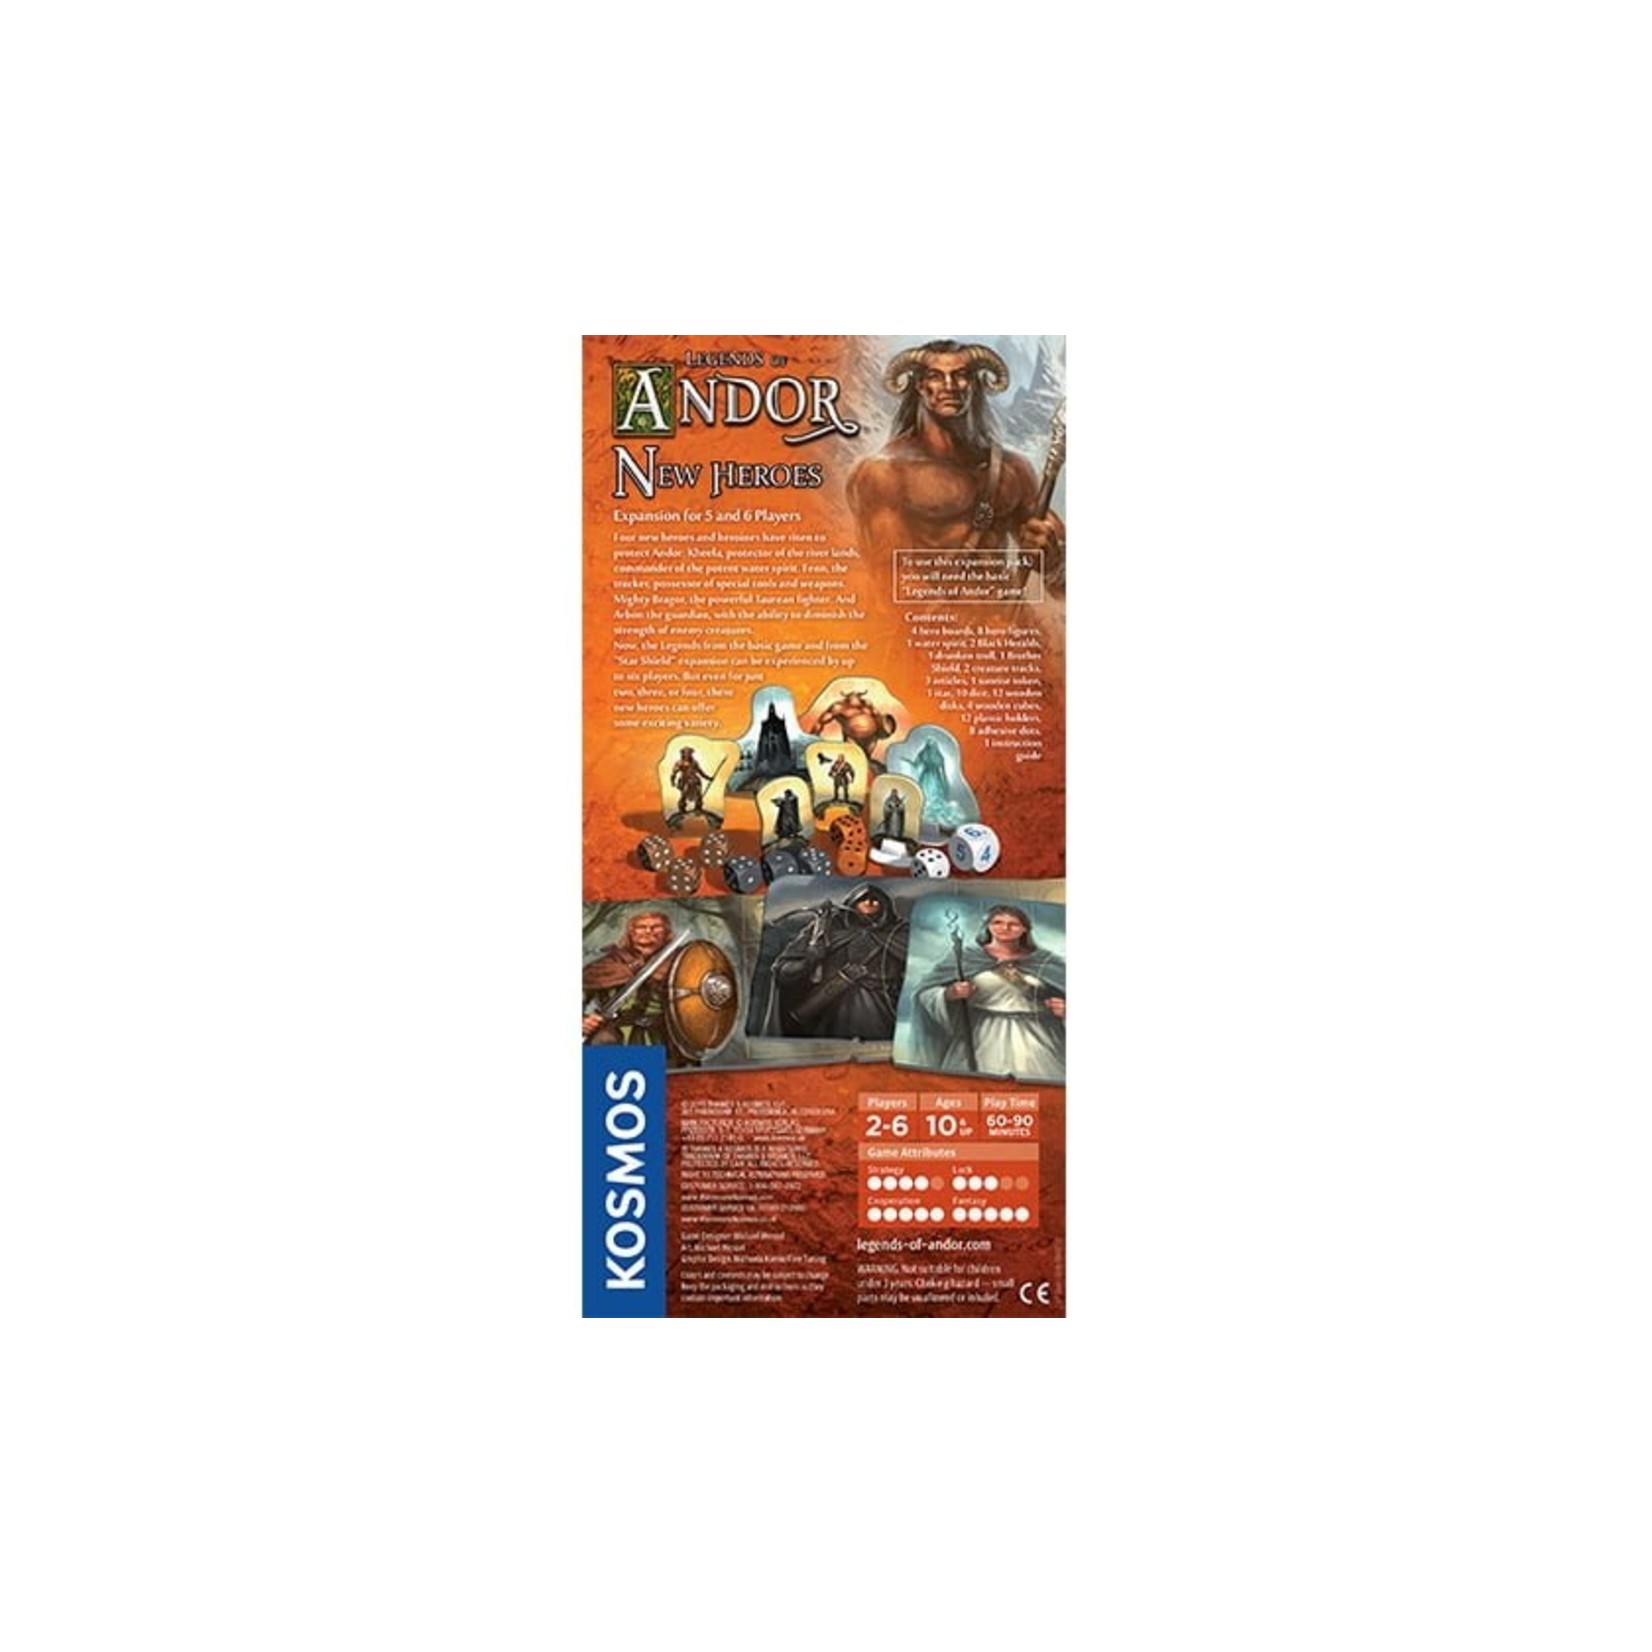 KOSMOS Legends of Andor - New Heroes Expansion